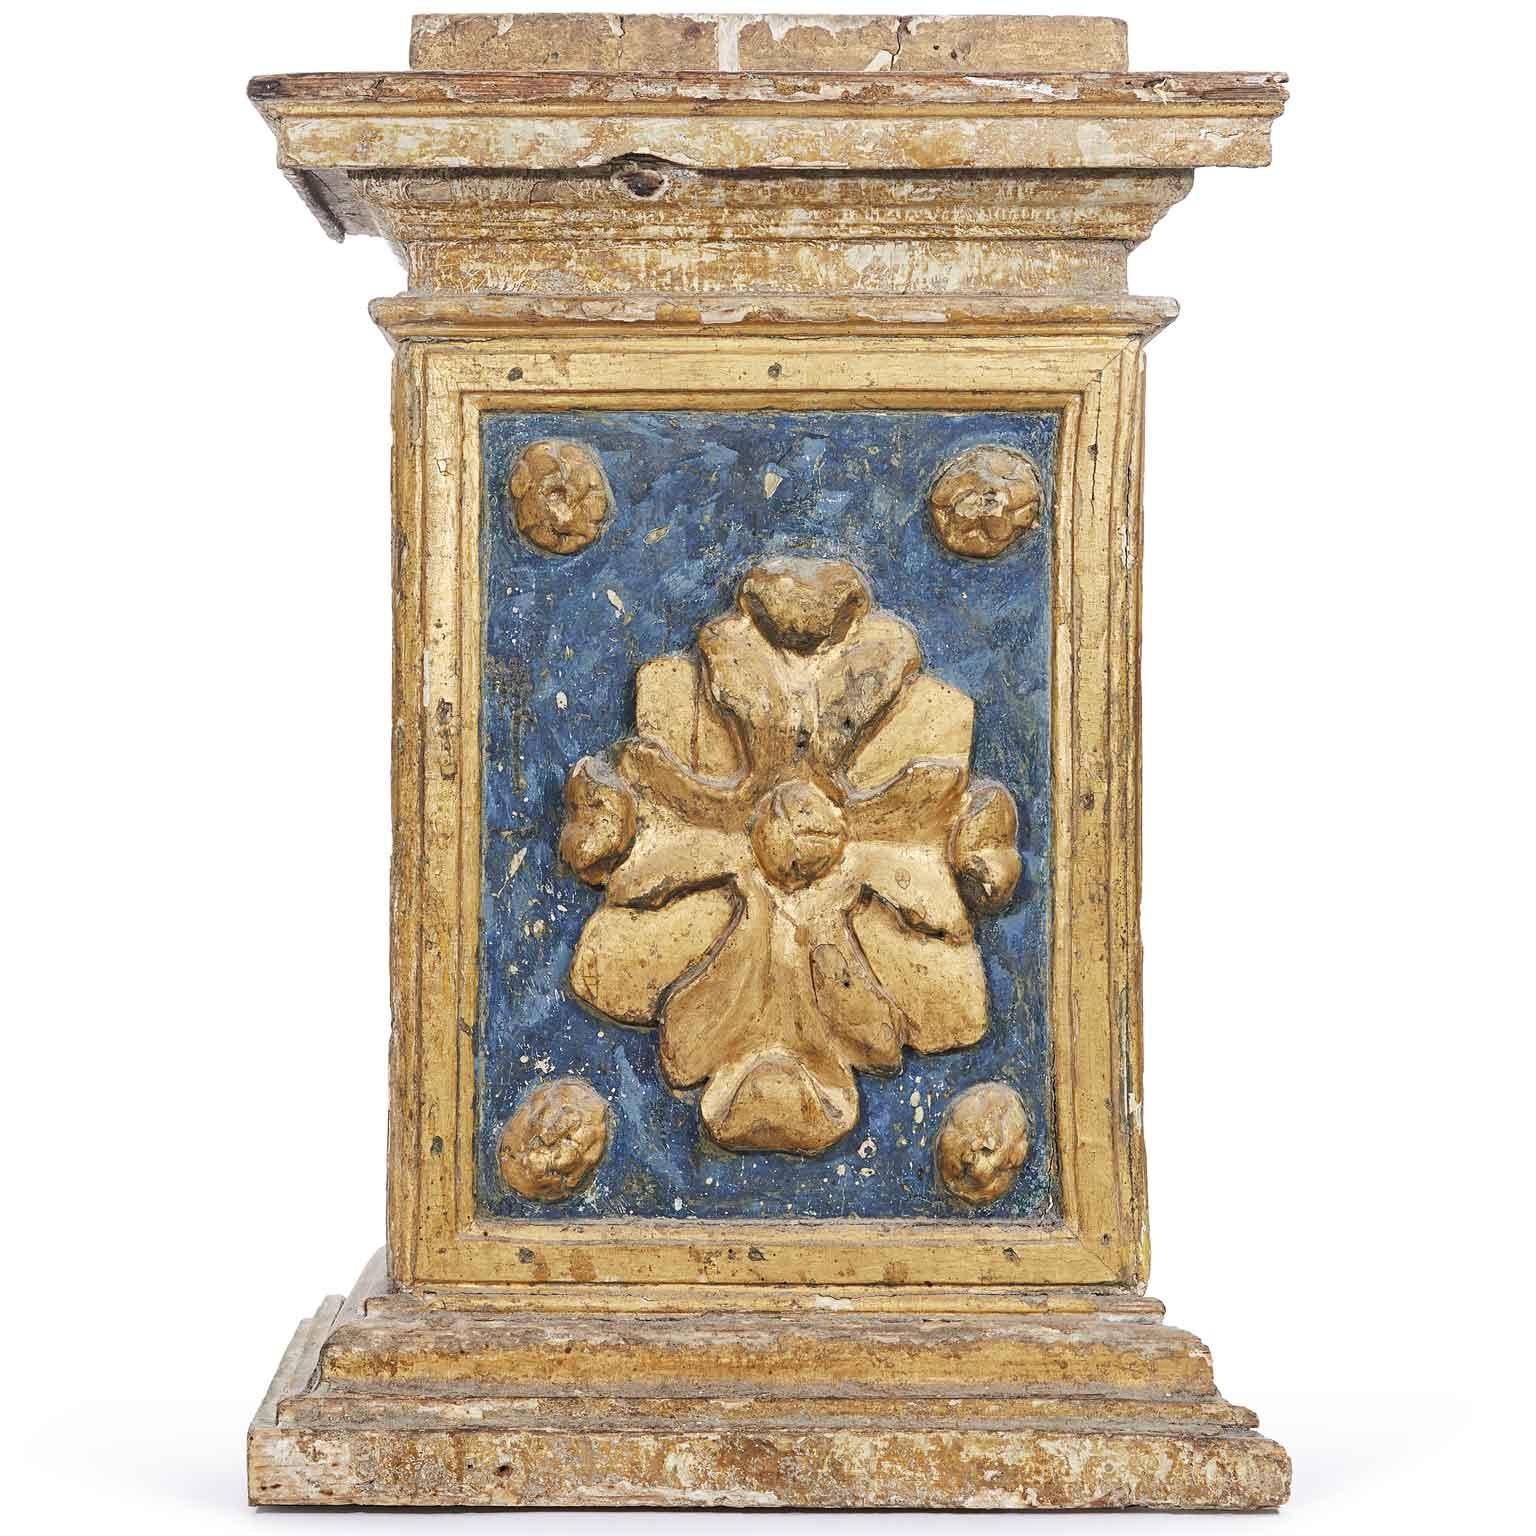 17th Century Italian Baroque Architectural Bases Pair of Carved and Giltwood Elements featuring blue painting details, a pair of antique decorative architectural elements probably coming from an altar furniture, suitable to realize two bed-side